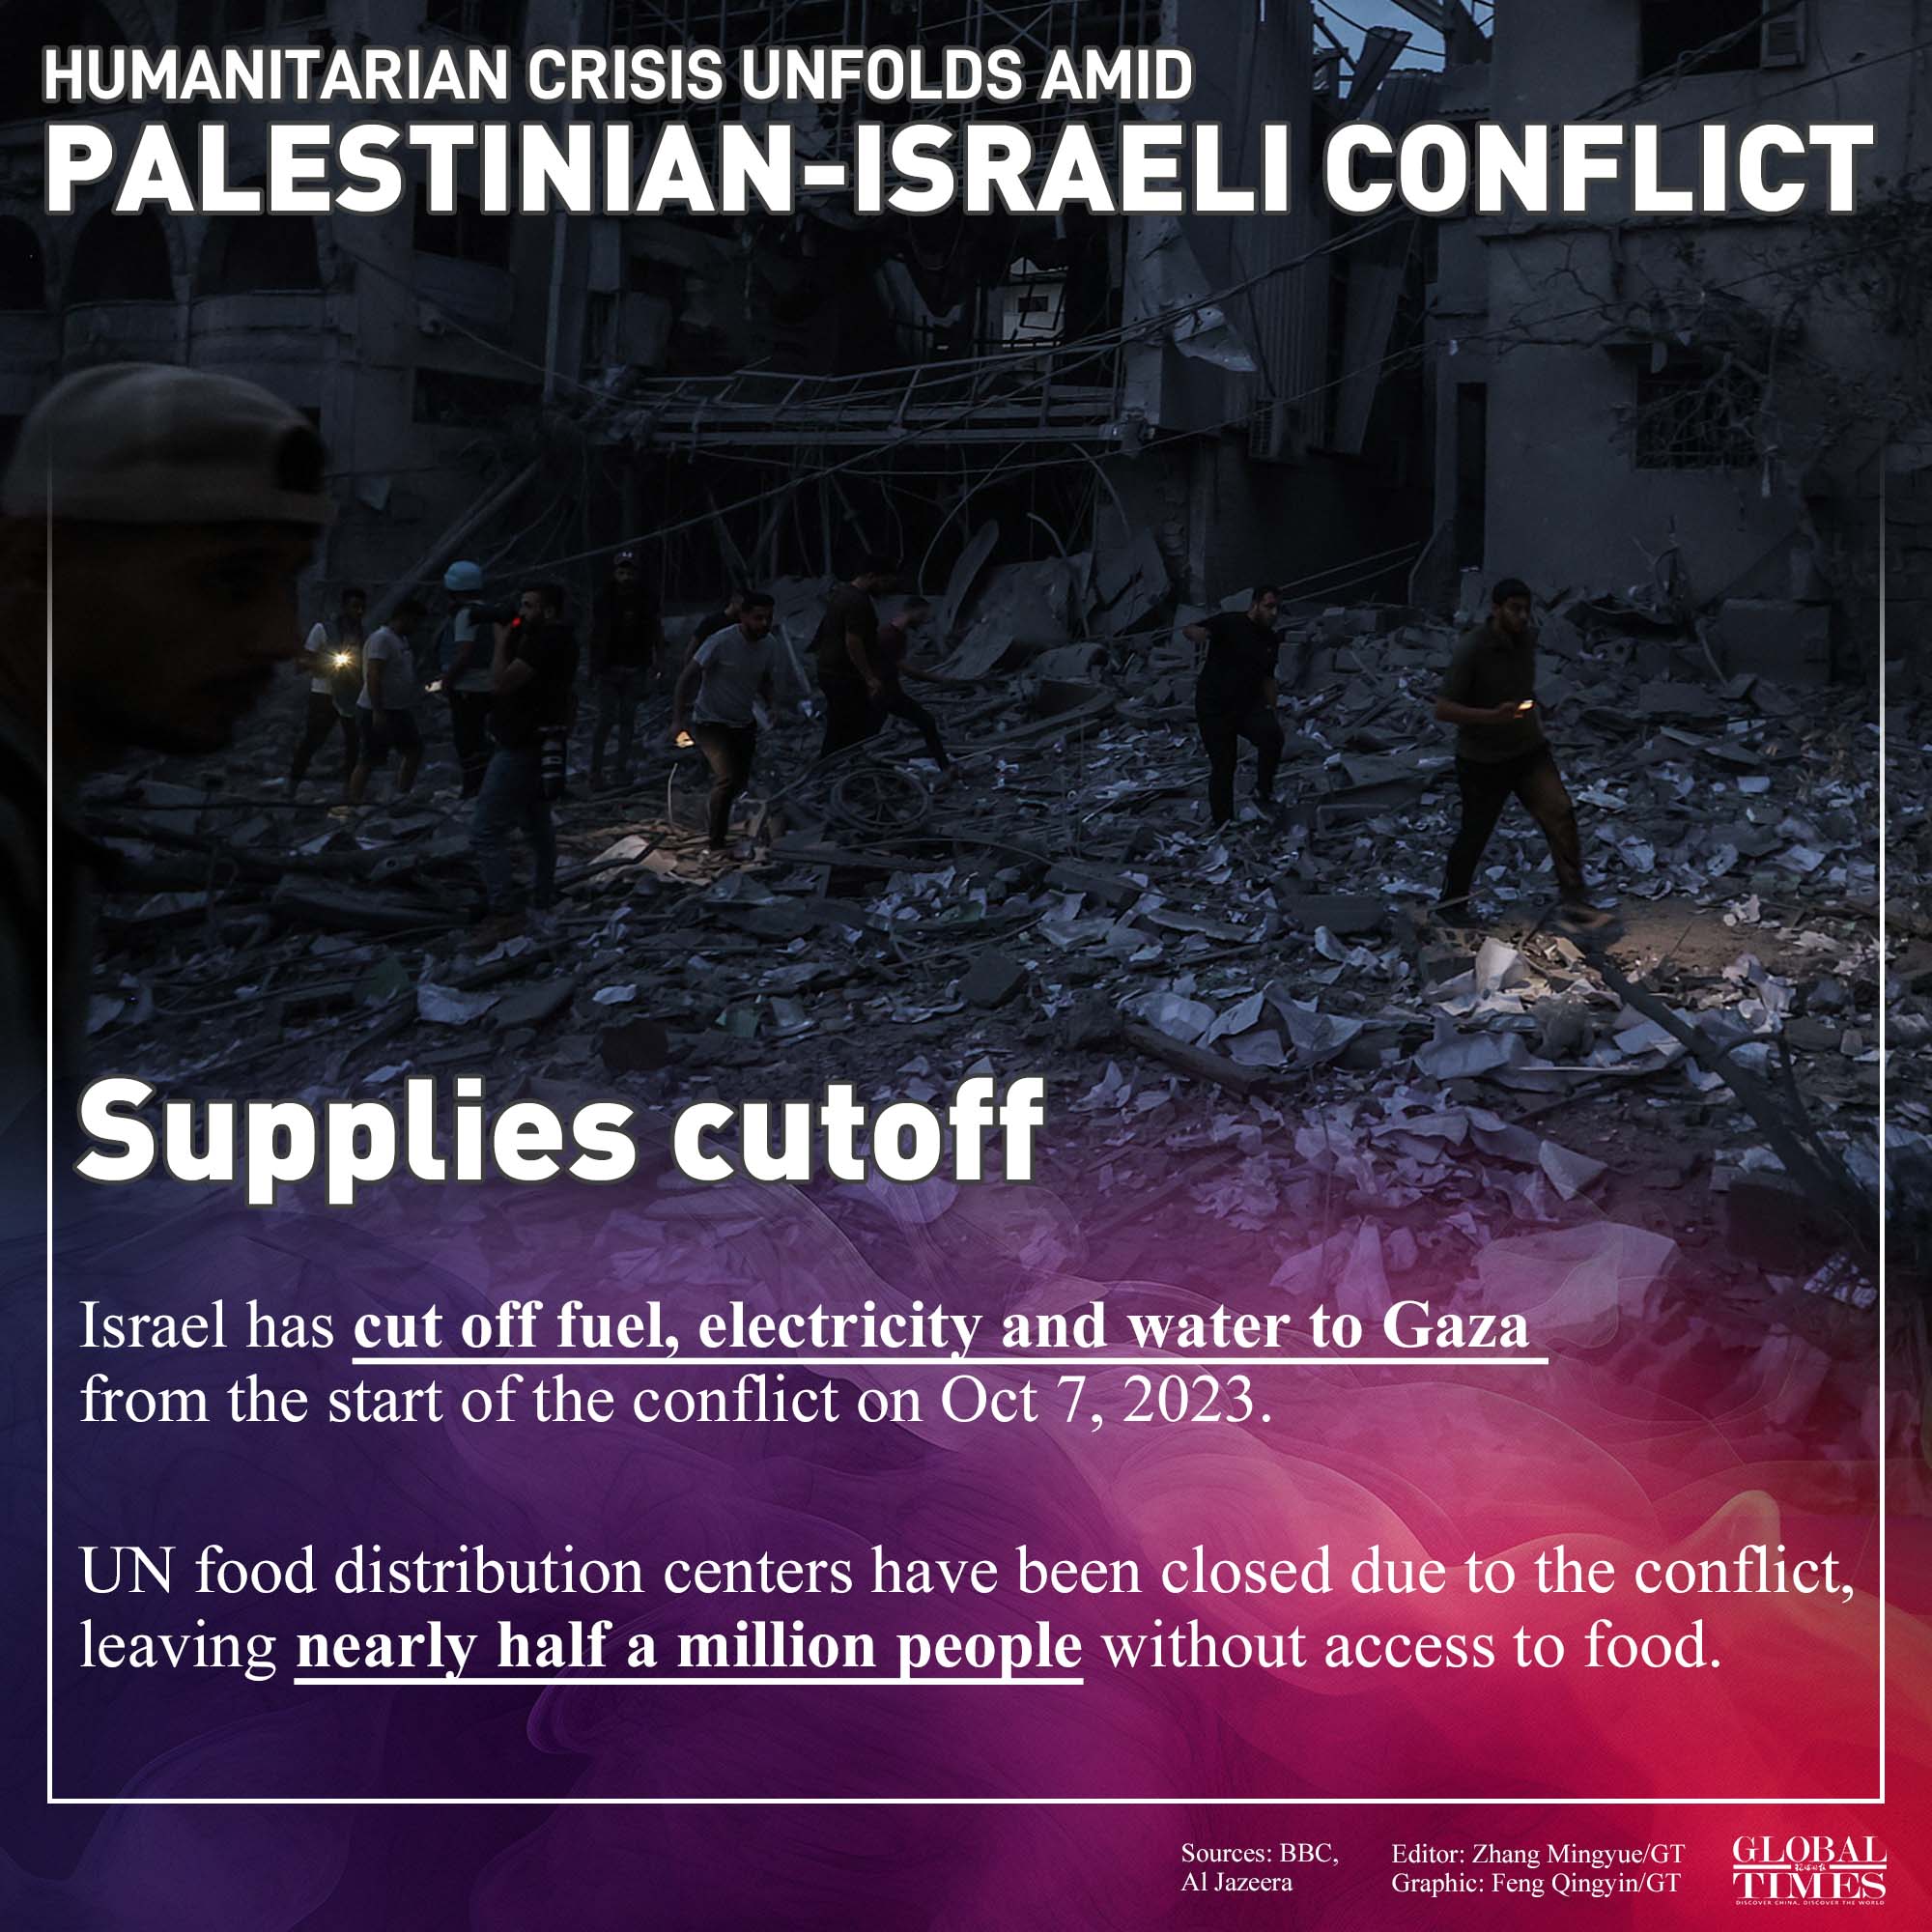 The ongoing Palestinian-Israeli conflict has claimed more than 5,800 lives. People are suffering from an unfolding humanitarian crises, facing displacement, the cutoff of supplies and a breakdown of the healthcare system. Editor: Zhang Mingyue/GT Graphic: Feng Qingyin/GT